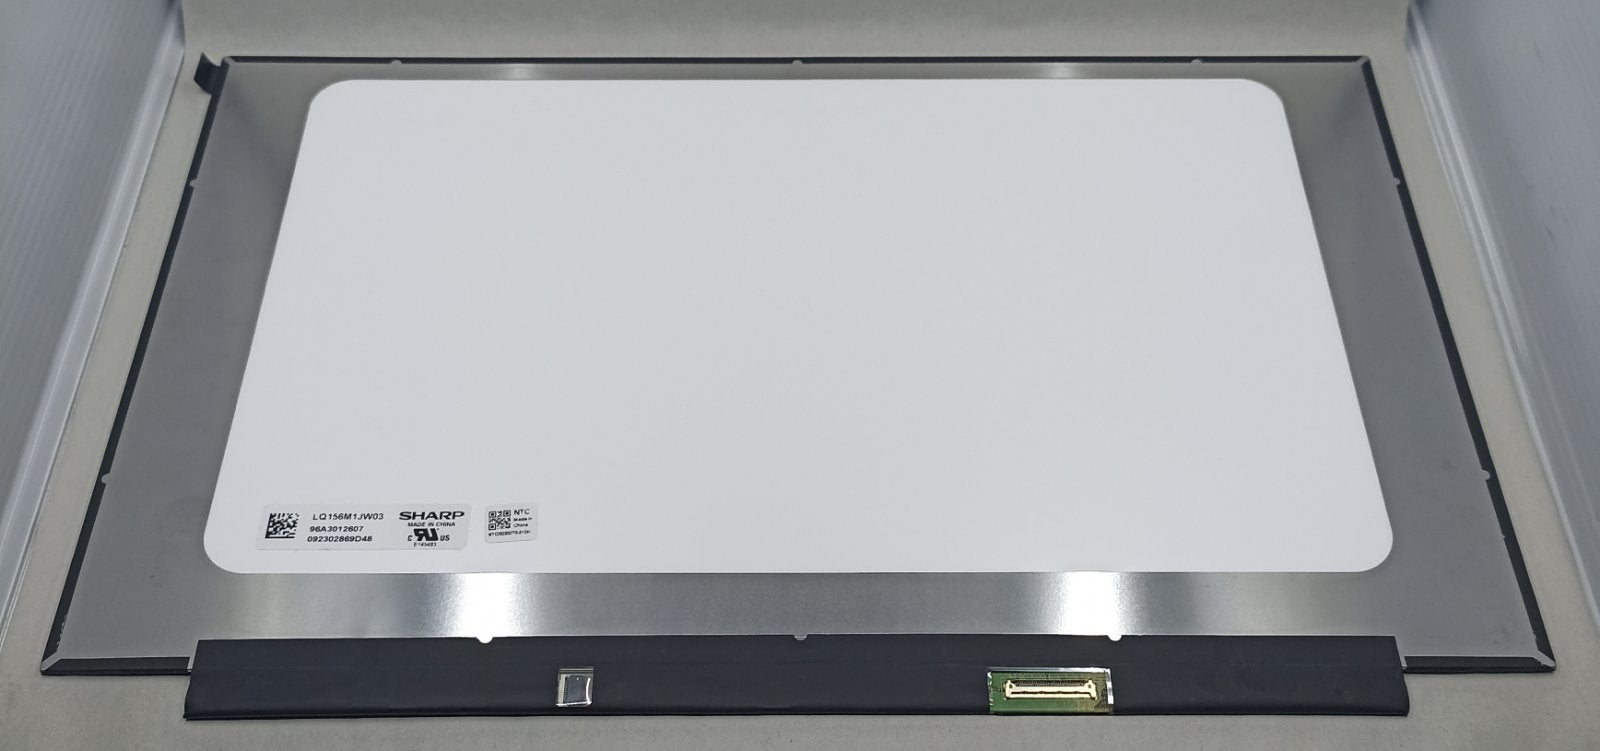 Replacement LCD For Asus GA502IV WL